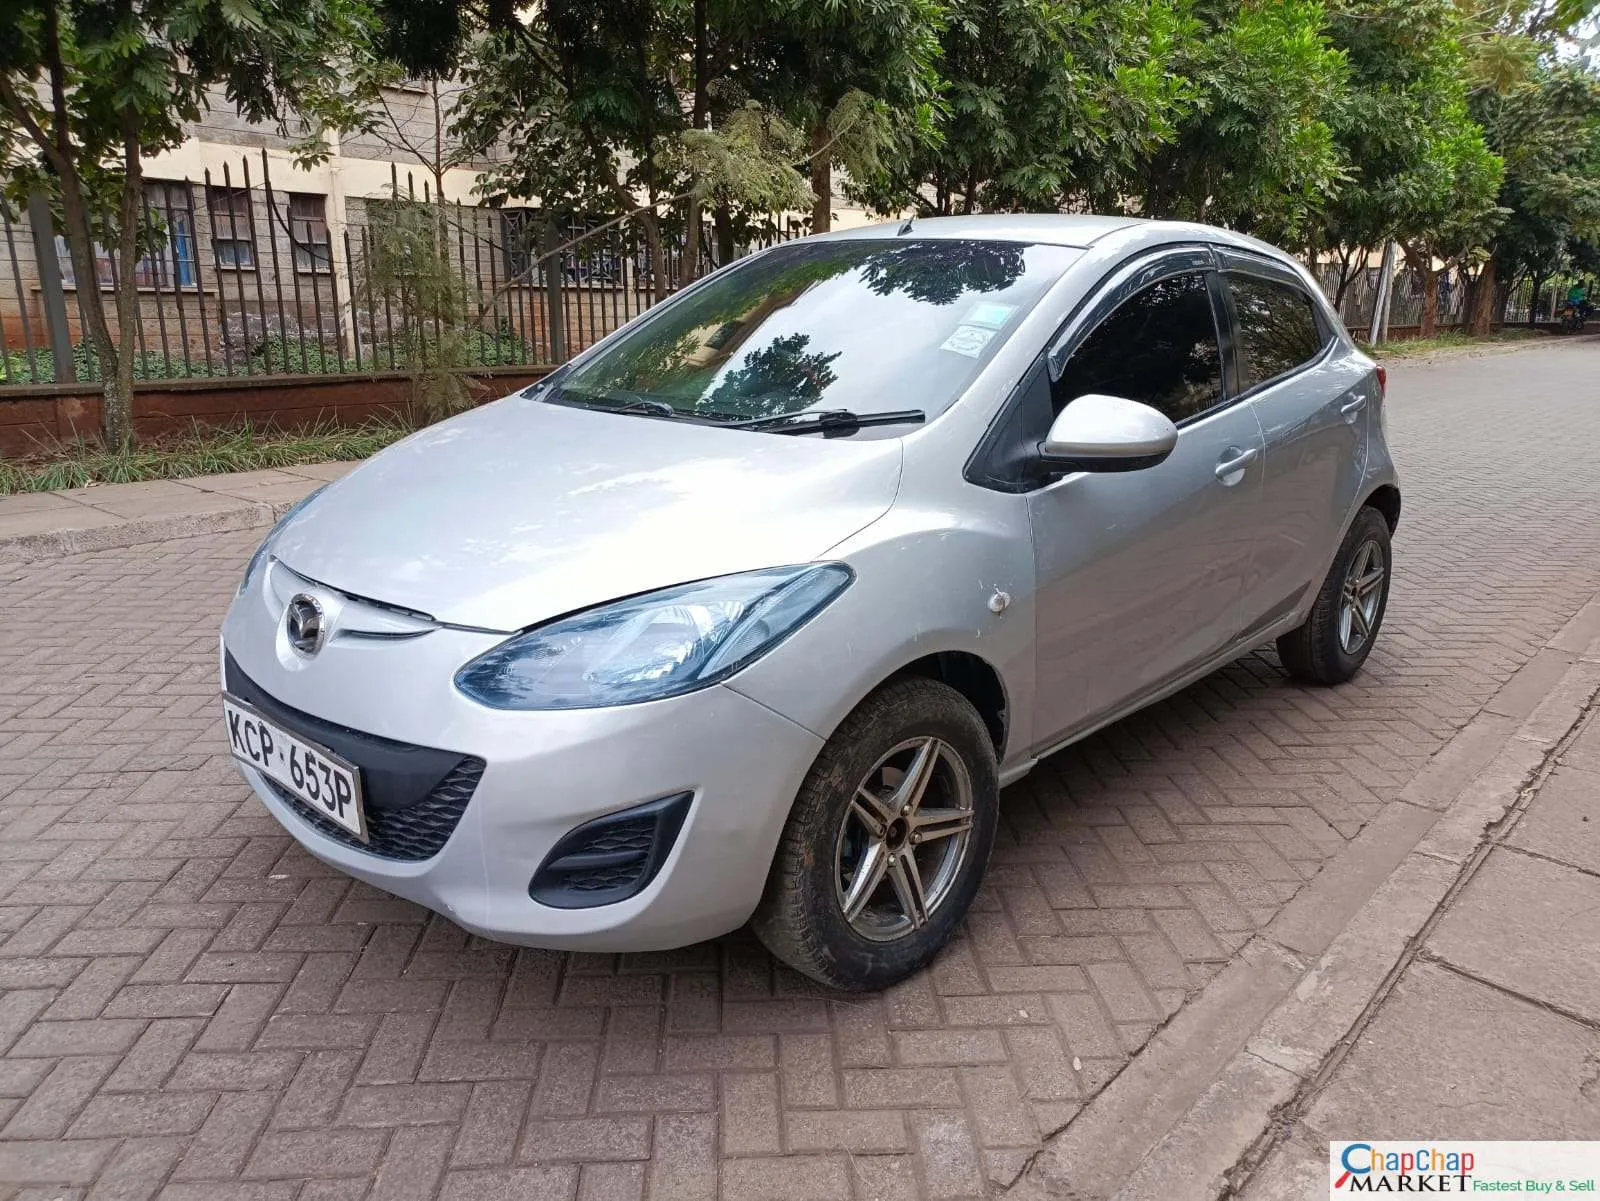 Cars Cars For Sale/Vehicles-Mazda Demio for sale in Kenya 🔥 You Pay 30% DEPOSIT TRADE IN OK EXCLUSIVE 15